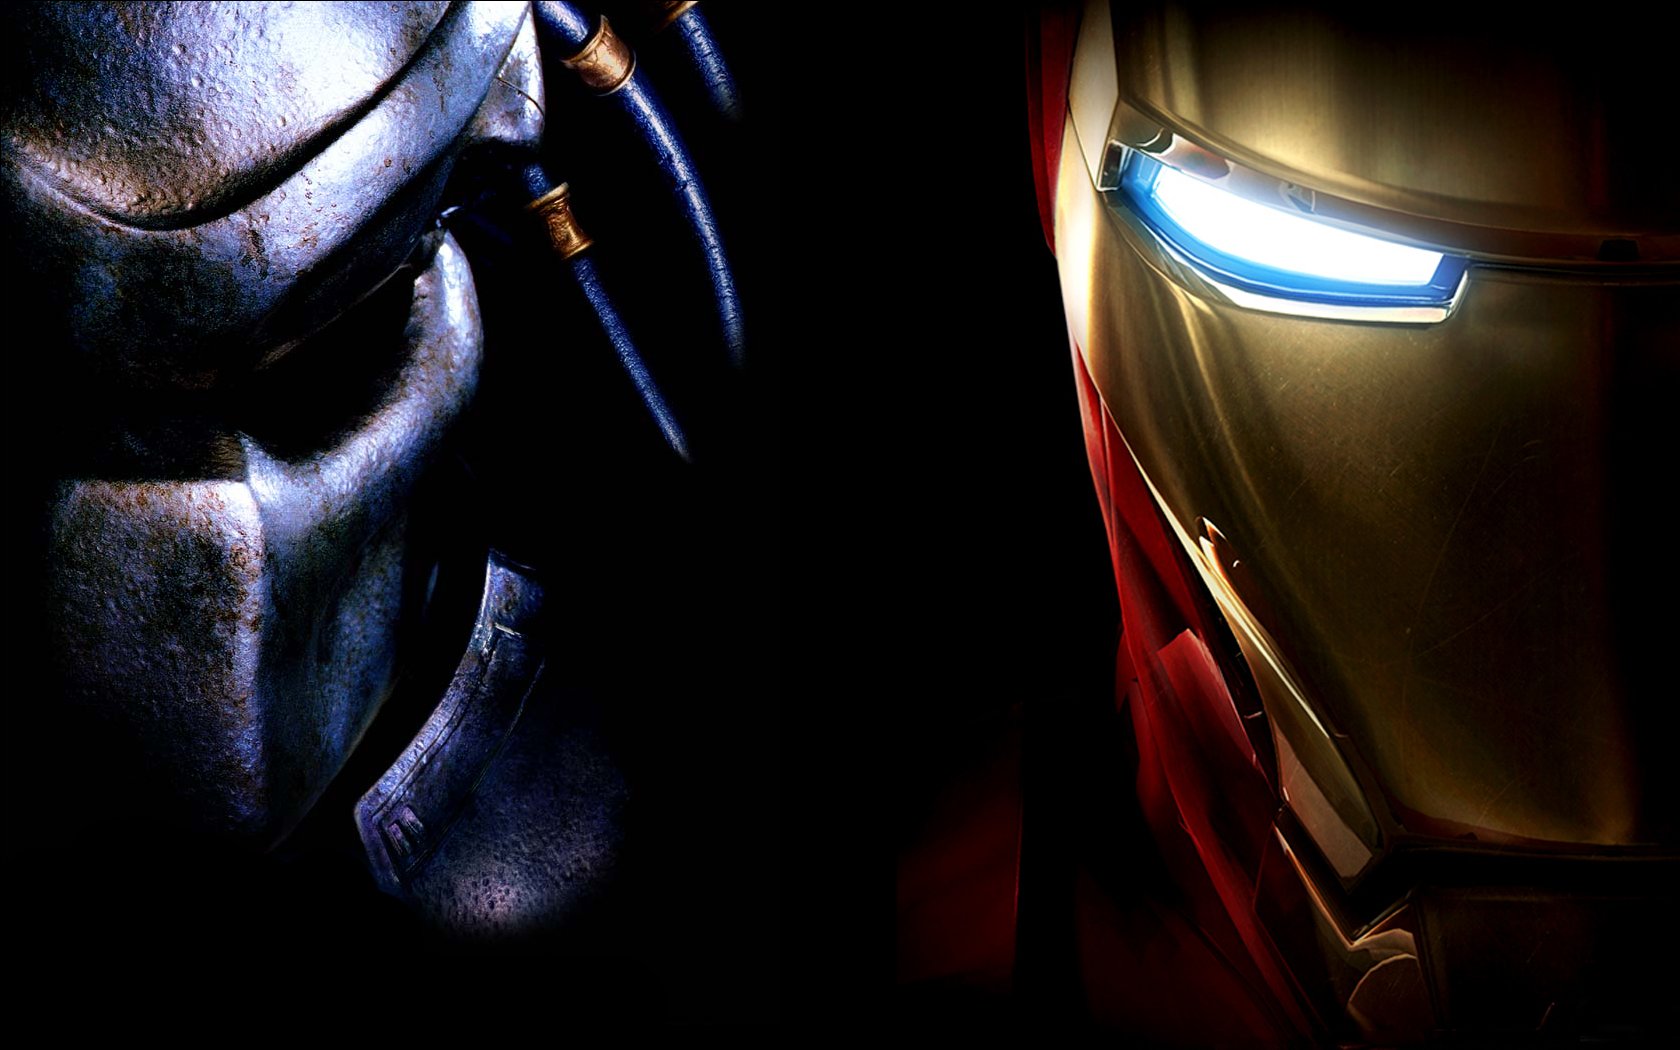 Iron Man and the Predator in a fantasy video game wallpaper on a high-definition desktop.